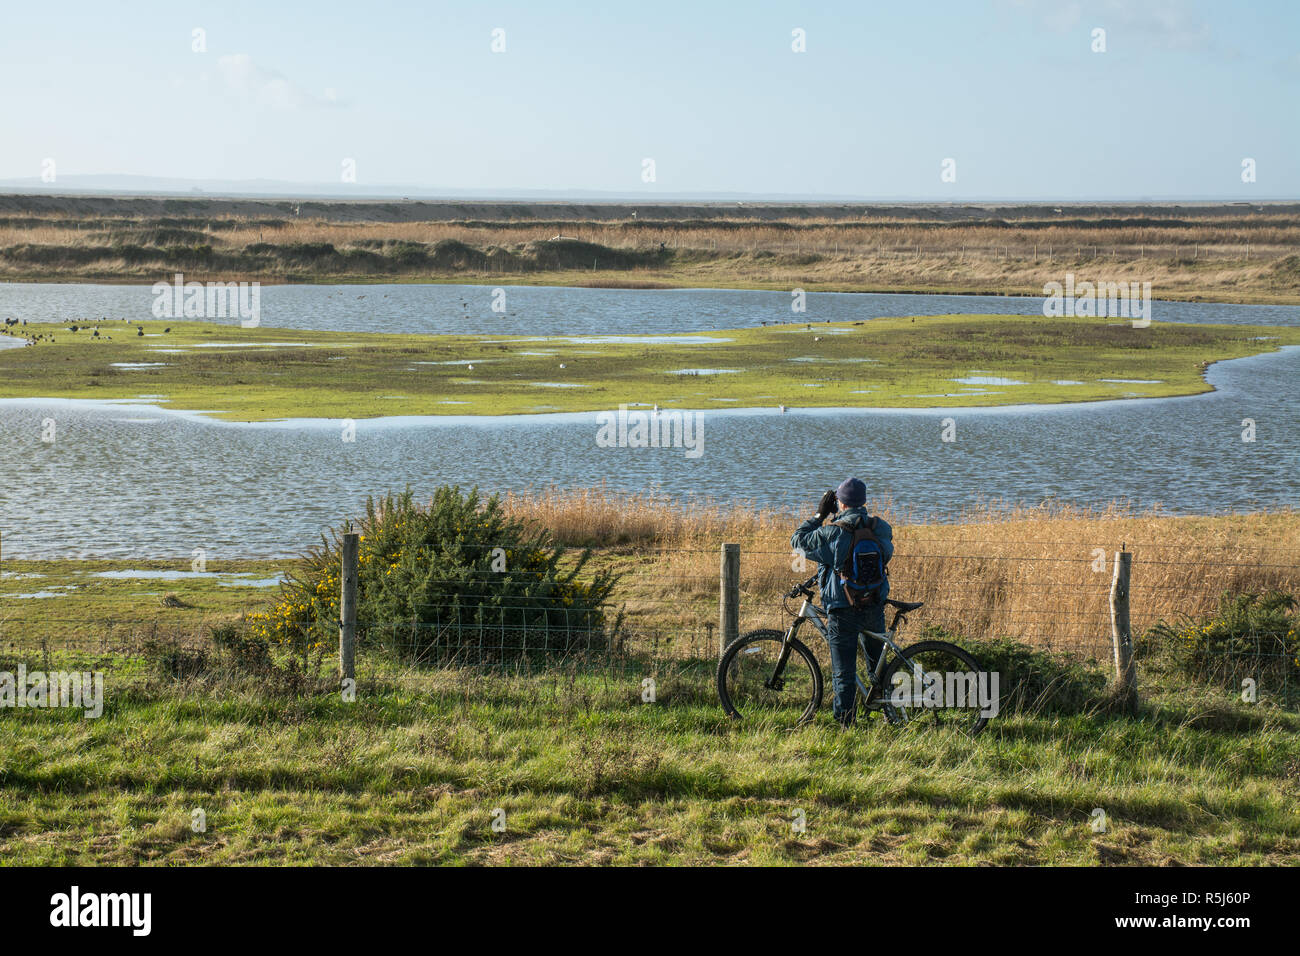 RSPB Medmerry Nature Reserve by the coast, West Sussex, UK. Birdwatcher on a bicycle looking at birds on the stilt pools through binoculars Stock Photo